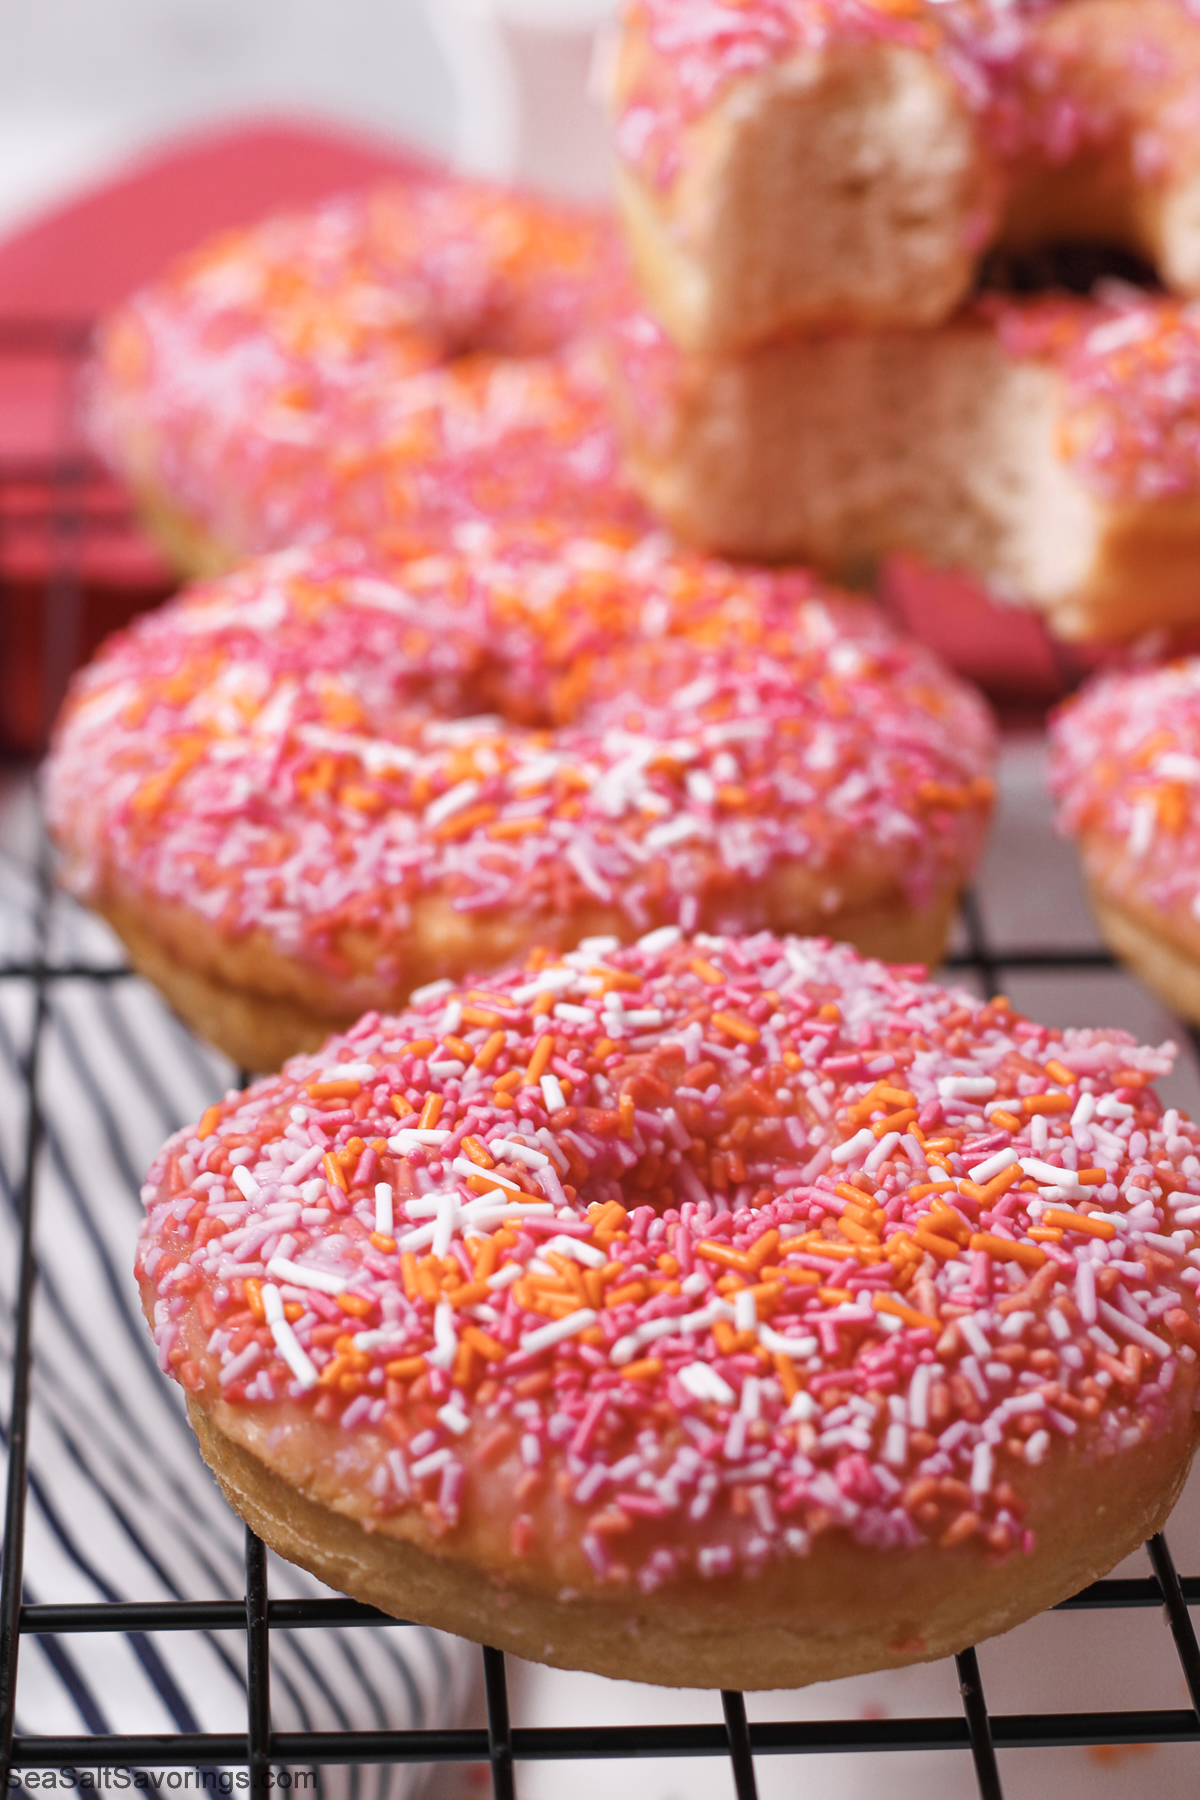 close up view of freshly baked donuts with colorful sprinkles on top